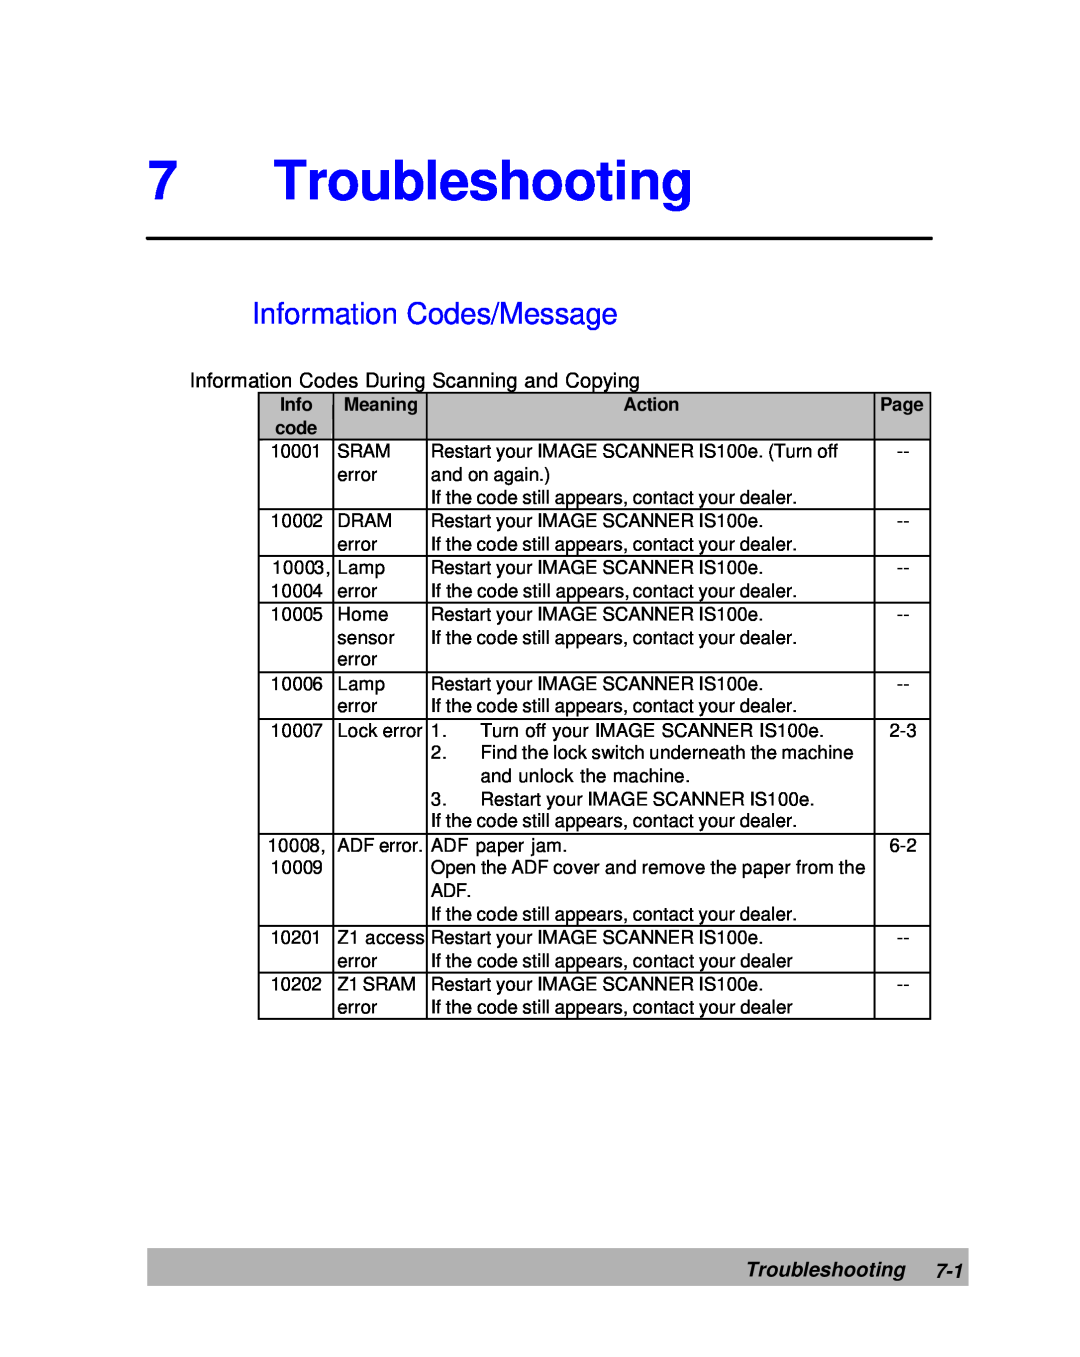 Lanier IS100e manual Troubleshooting, Information Codes/Message, Meaning, Action, Page, code 